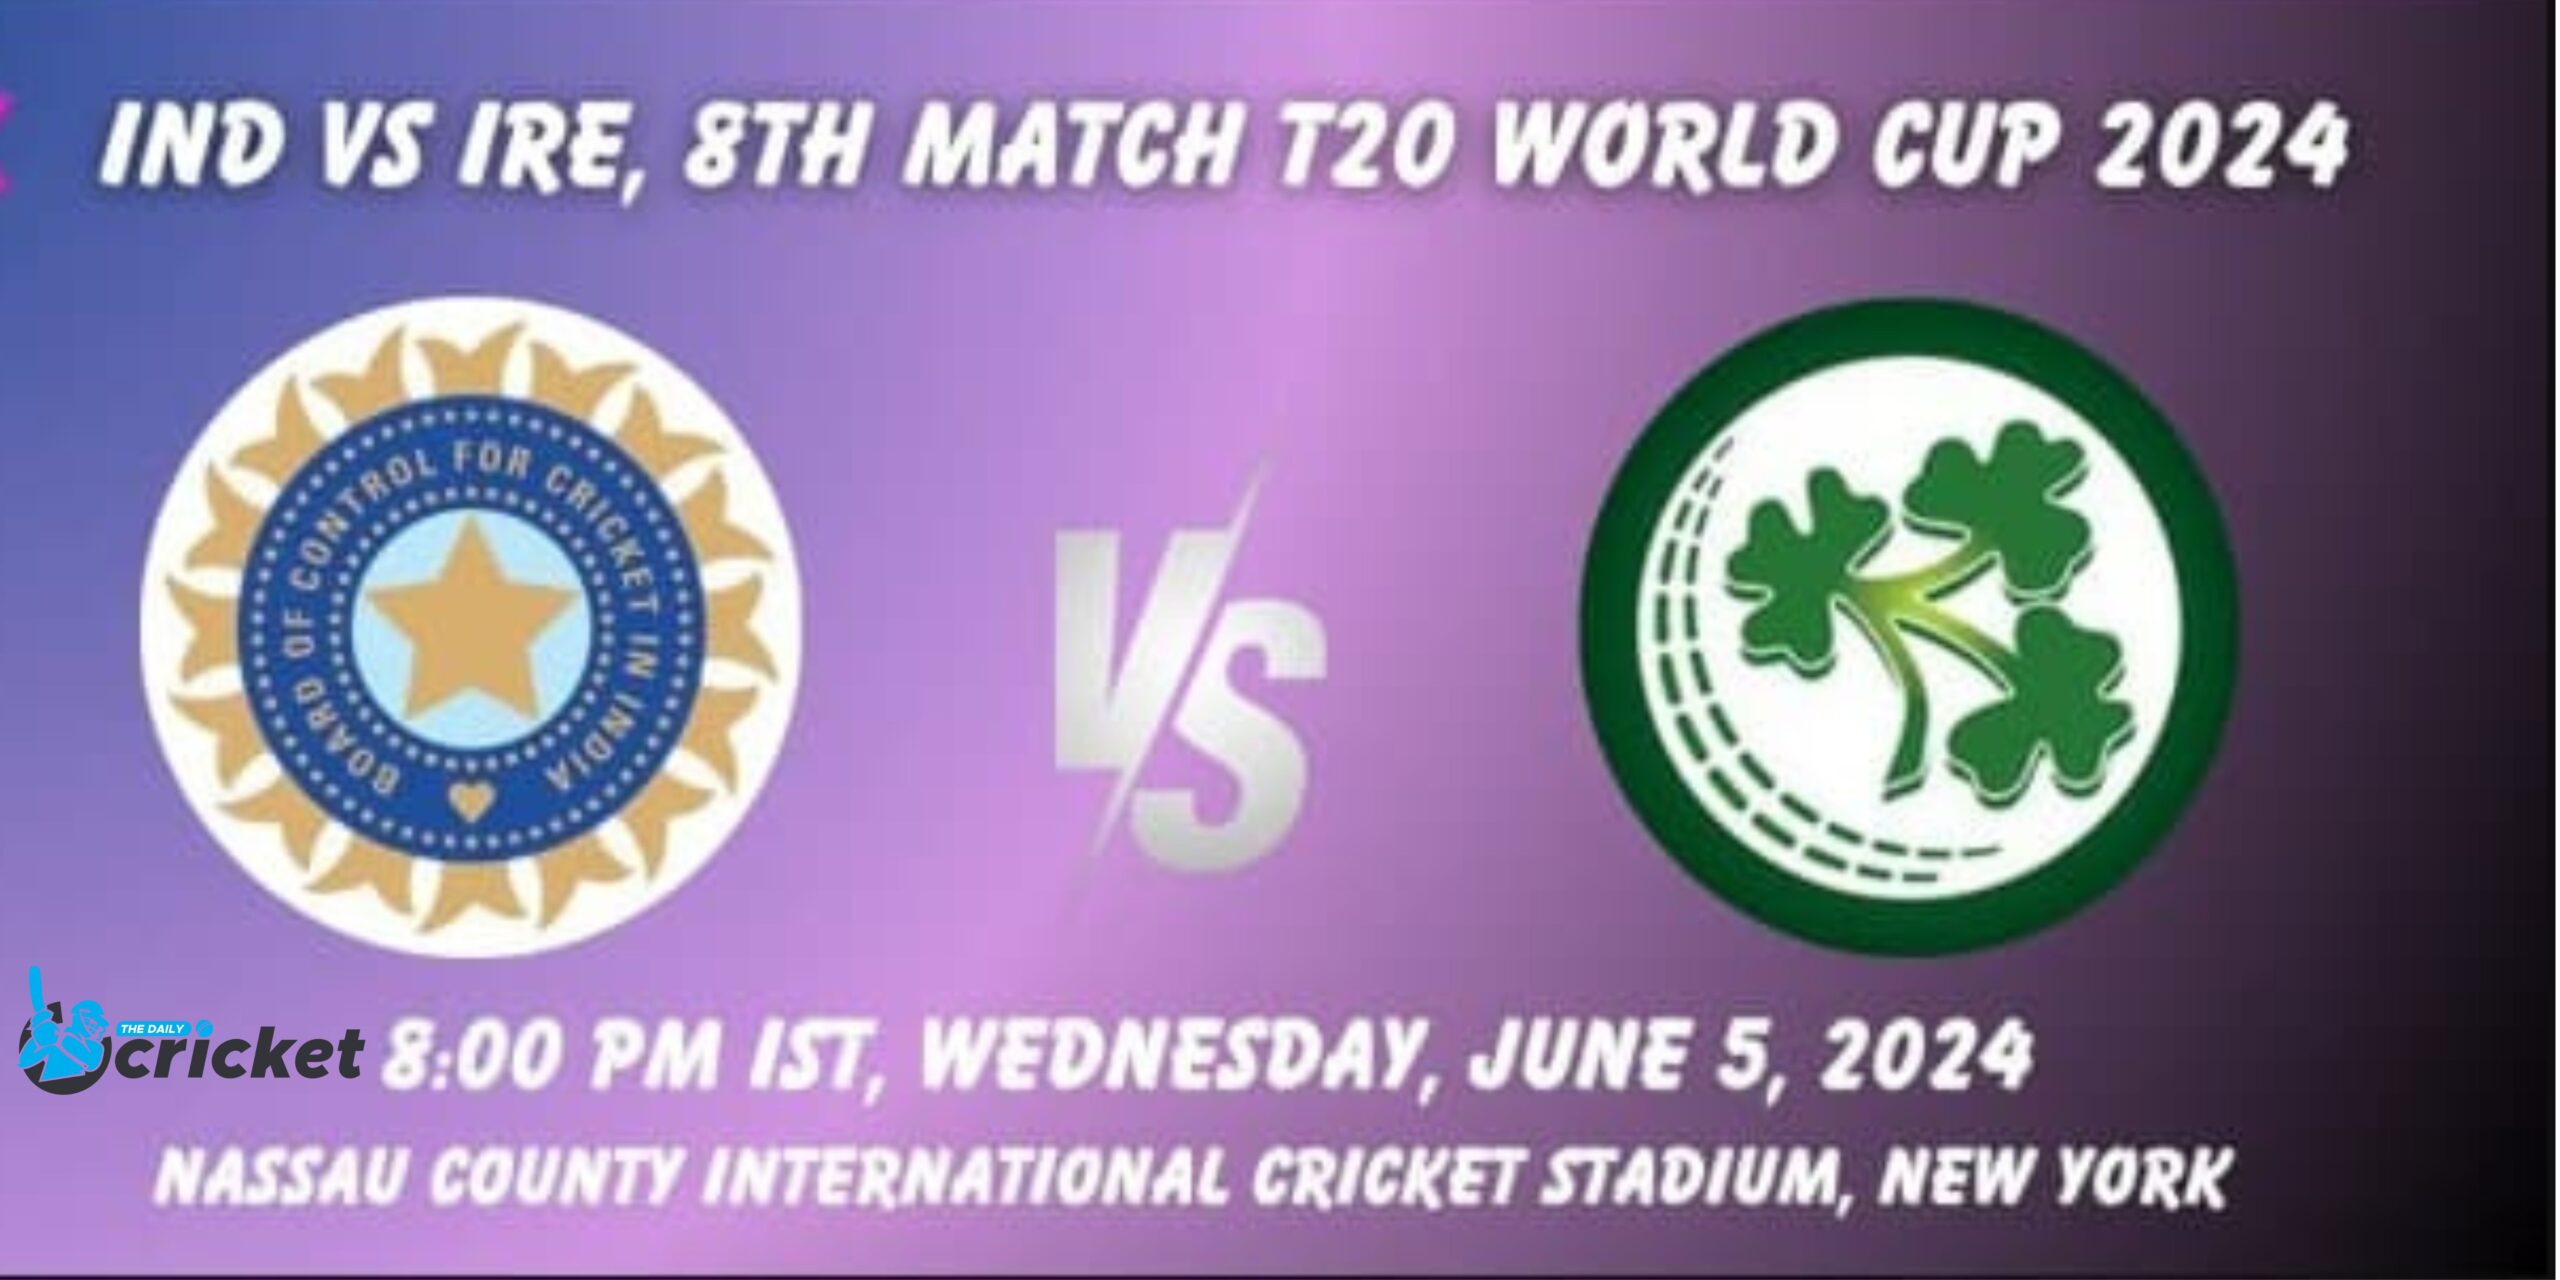 IND vs IRE Match Prediction – Who will win today?